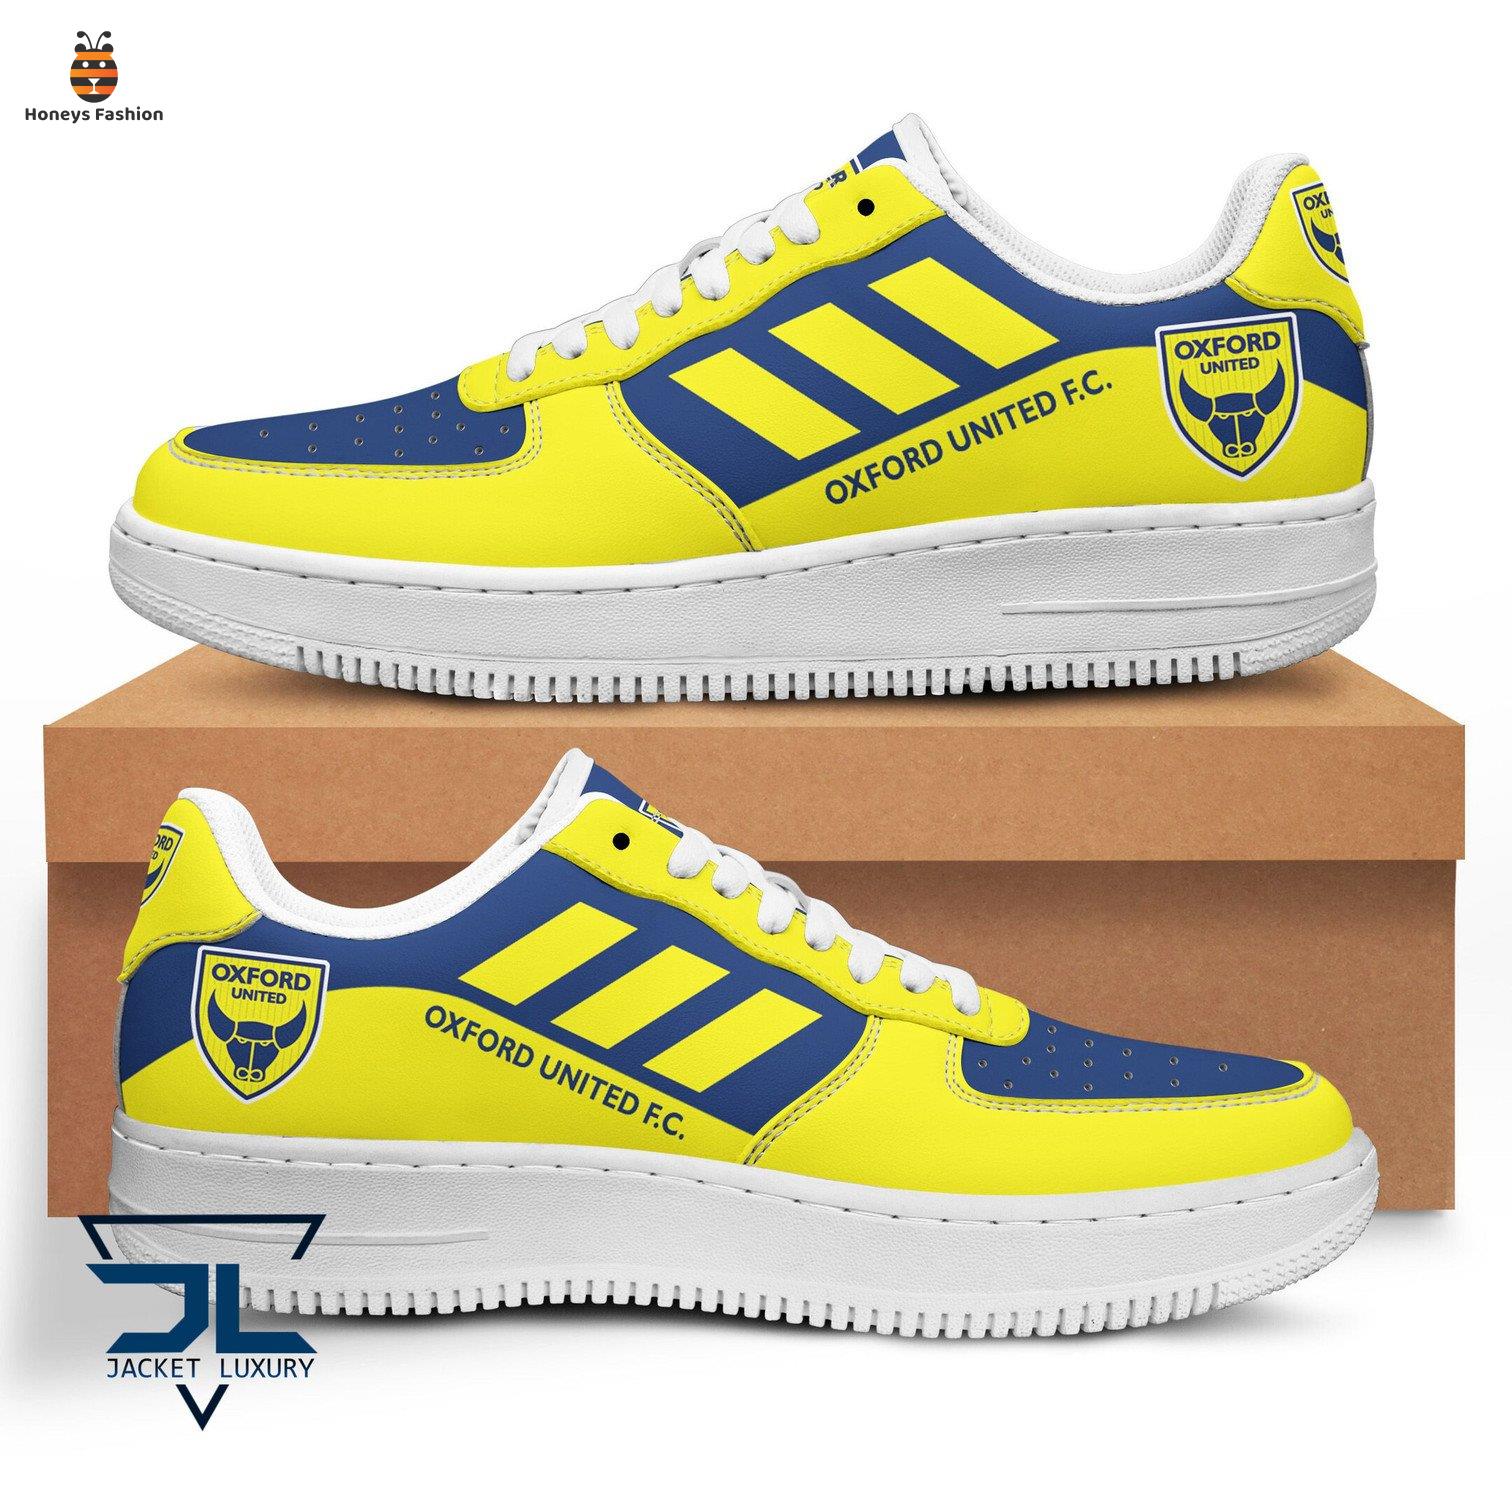 Oxford United F.C air force 1 shoes